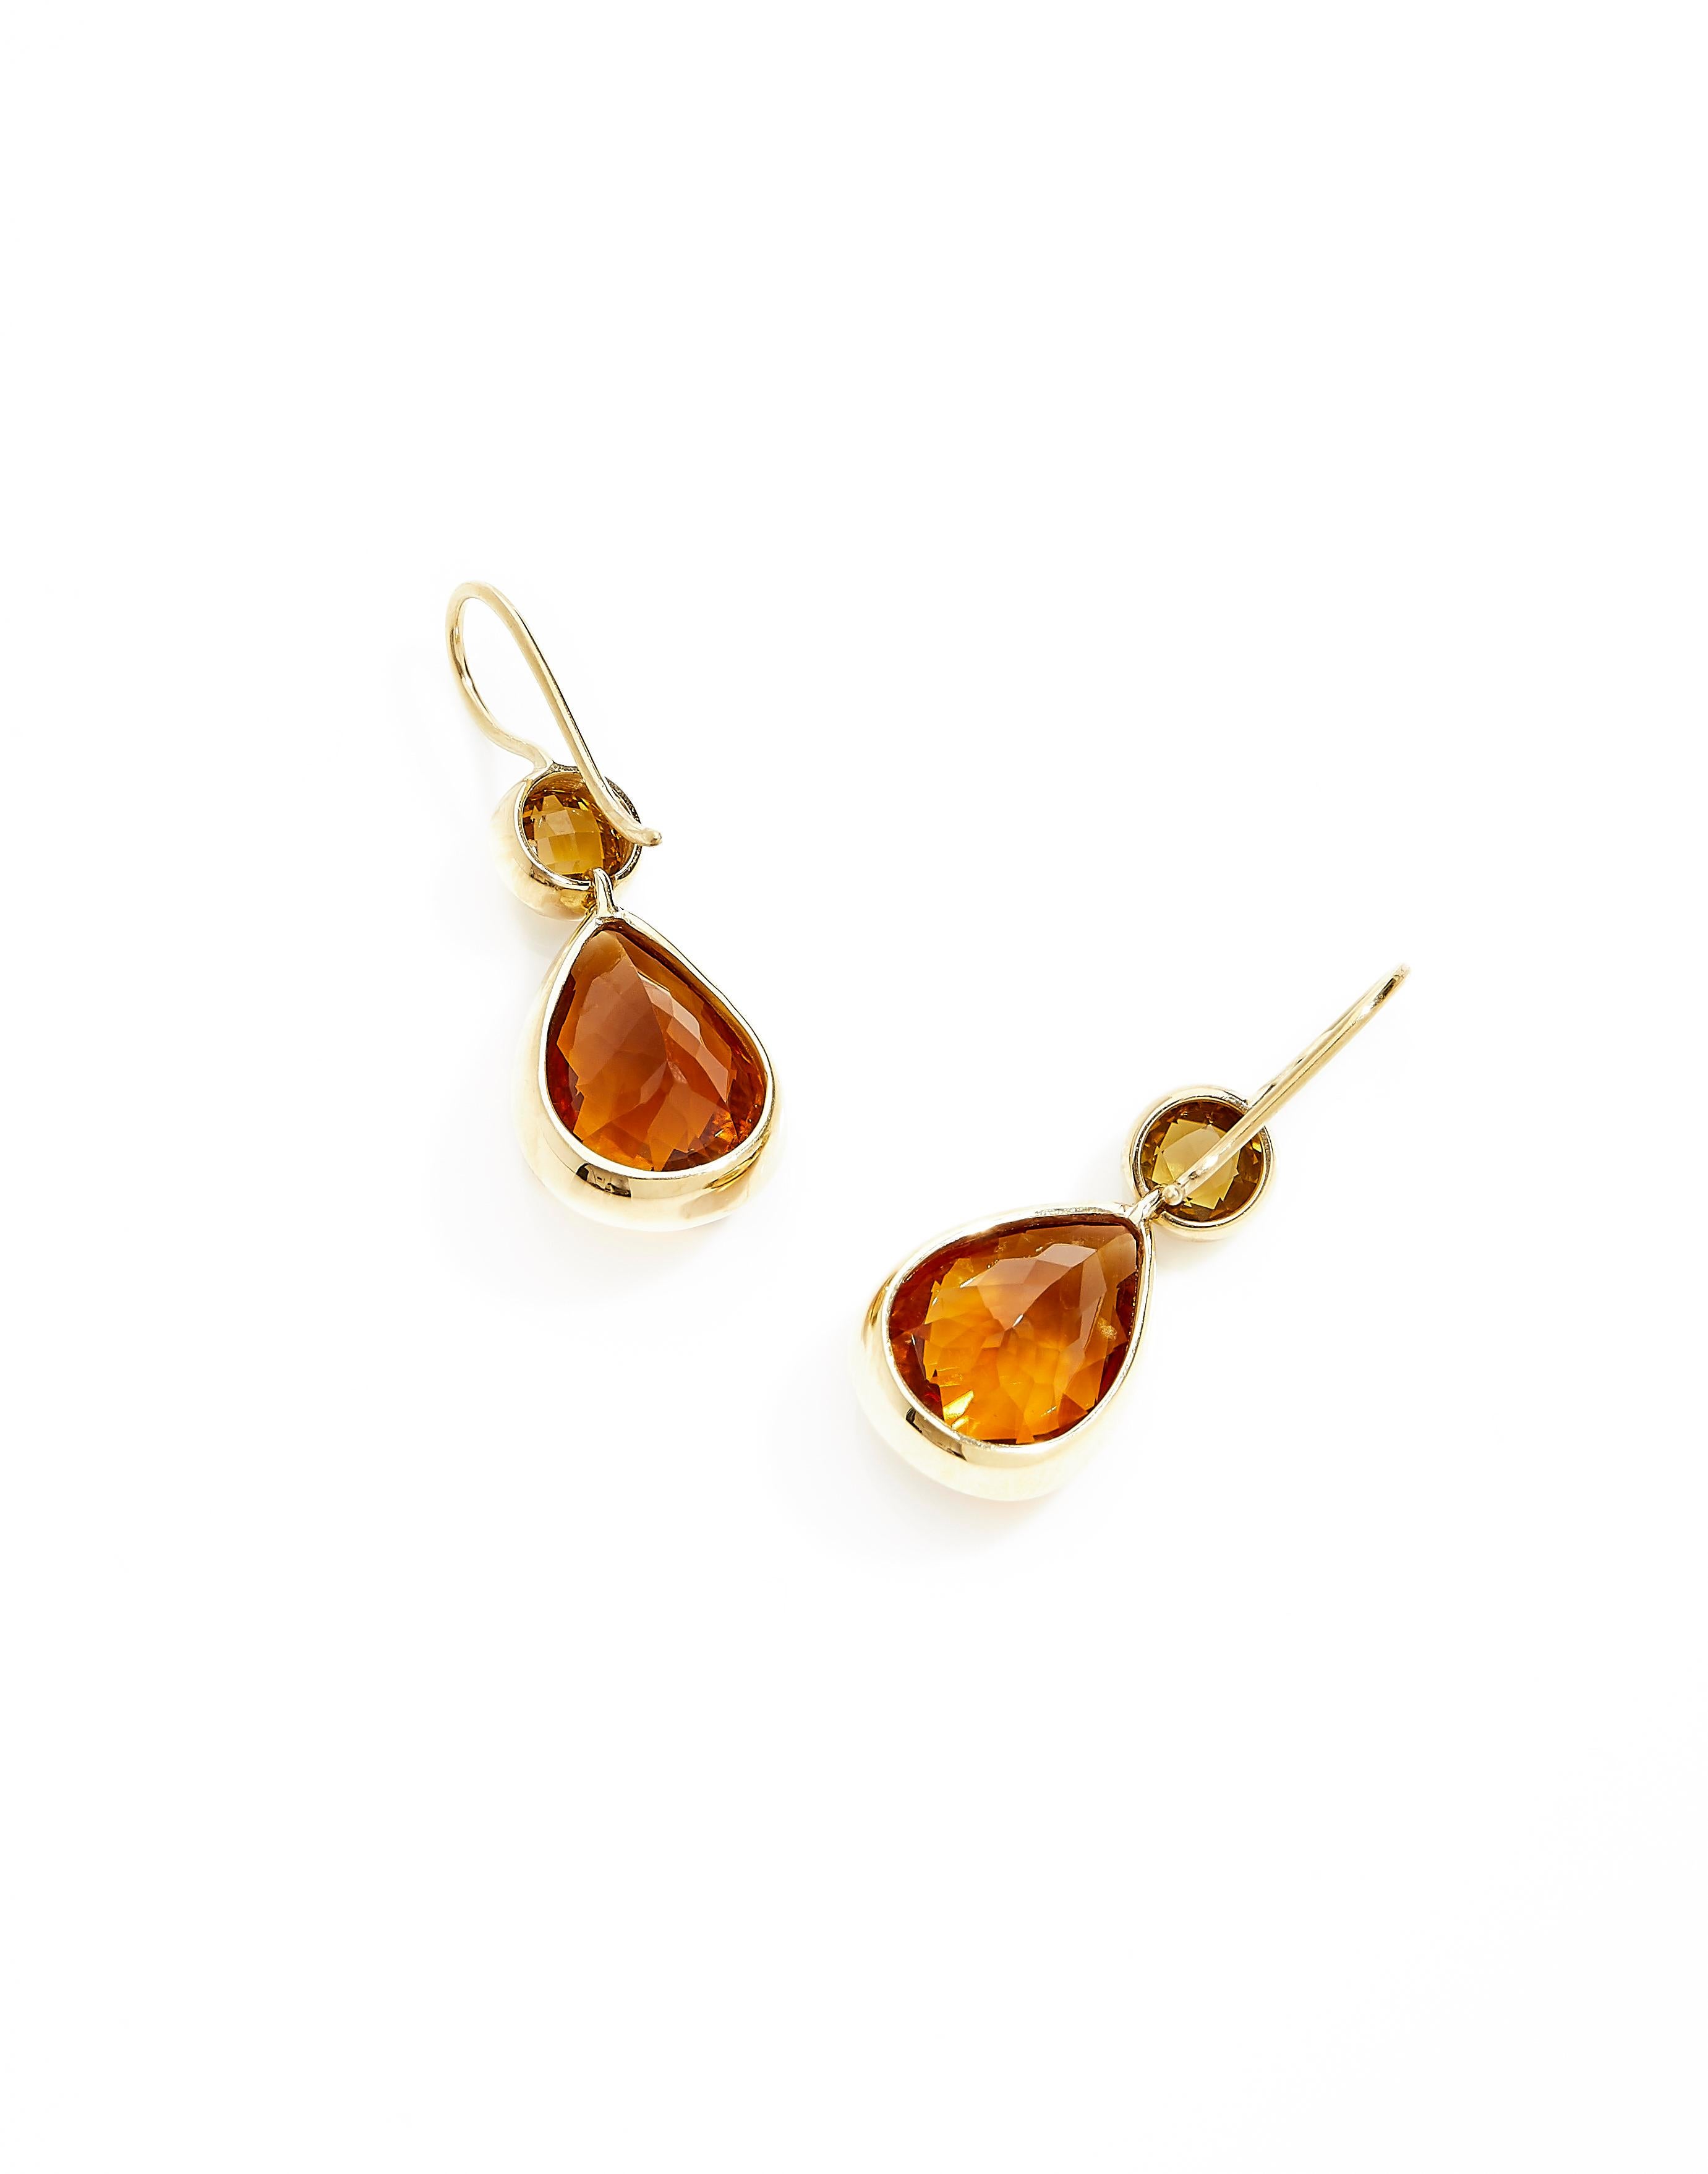 Pear Cut 18 Karat Yellow Gold Drop Earrings Set with 14.89 Carat Citrines and Tourmalines For Sale